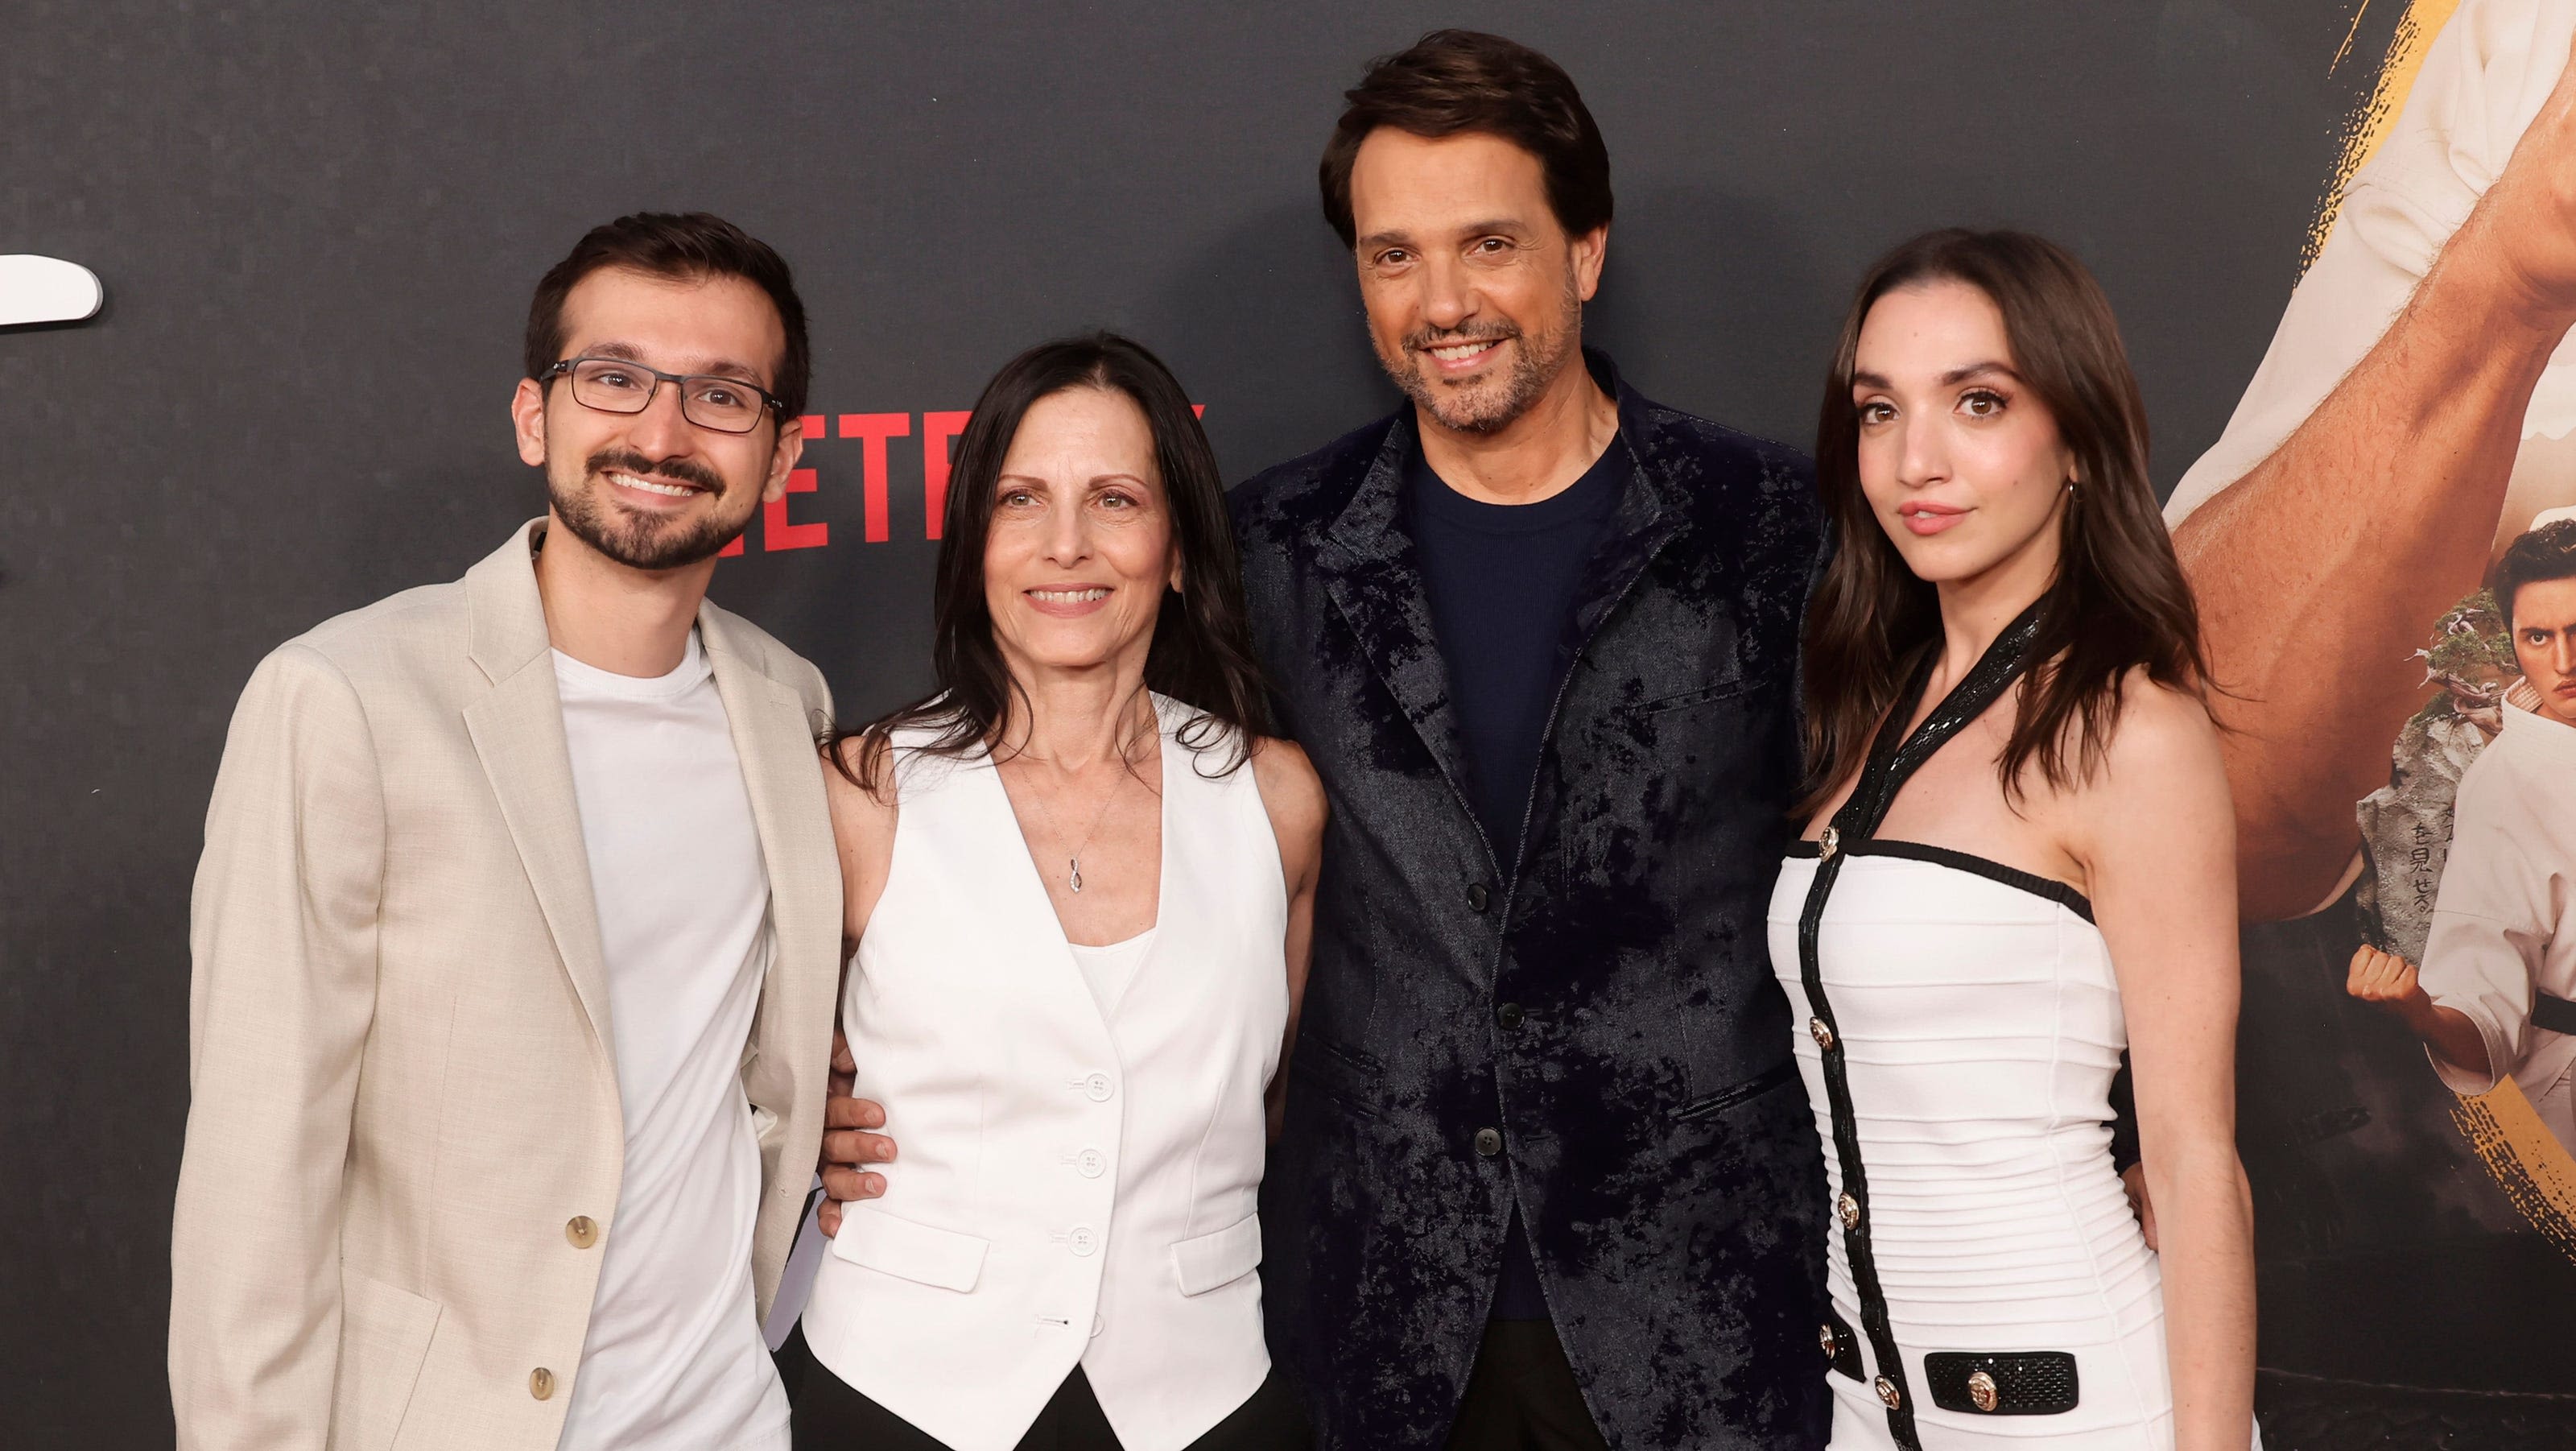 Ralph Macchio reflects on nurturing marriage with Phyllis Fierro while filming 'Cobra Kai'